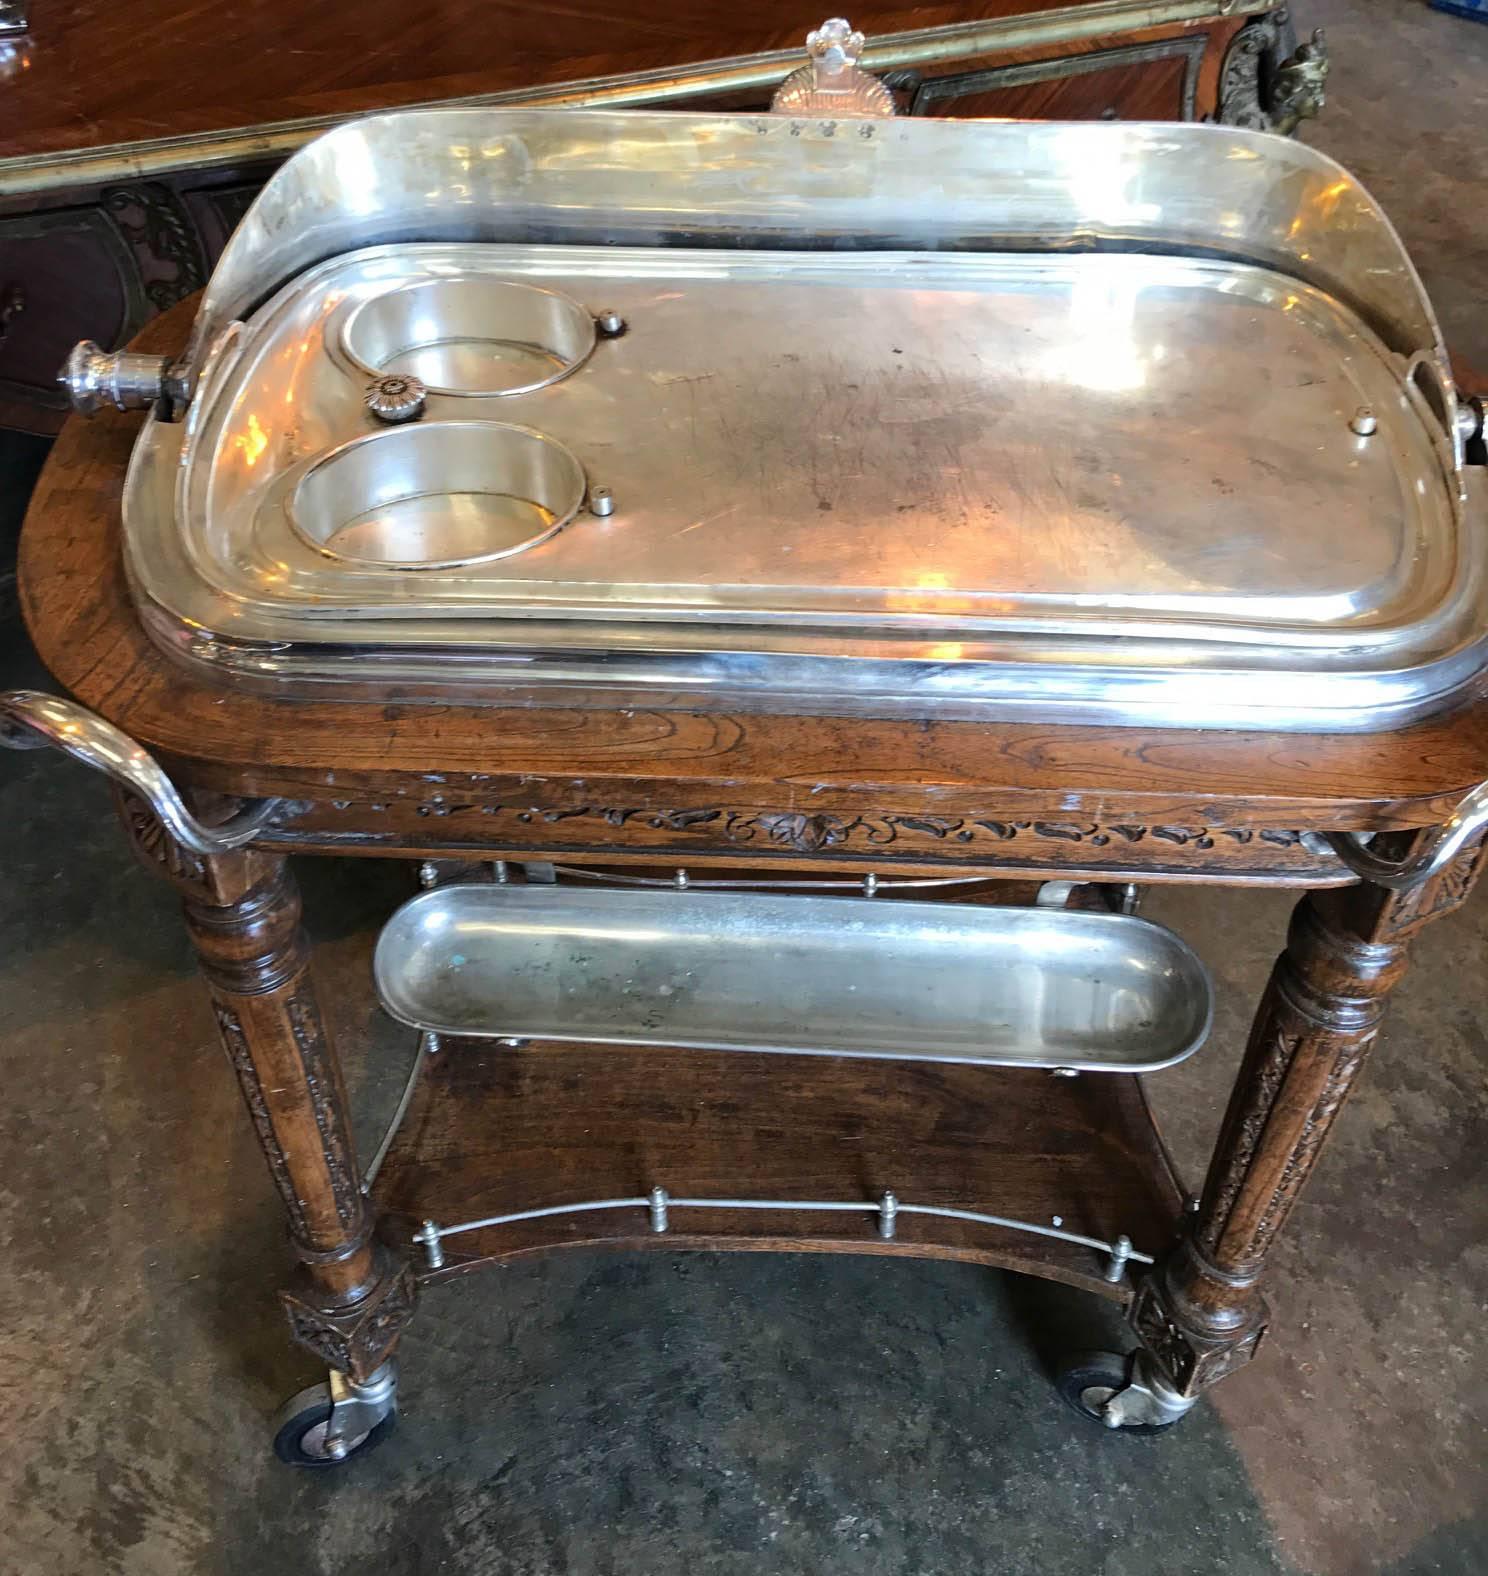 Stunning antique Maison Christofle silver plate beef trolley
Piece features two gravy boats
Intricately hand-carved wooden base in walnut, just look at the intricately carved details
It has two burners 
The dome is engraved 
This was purchased